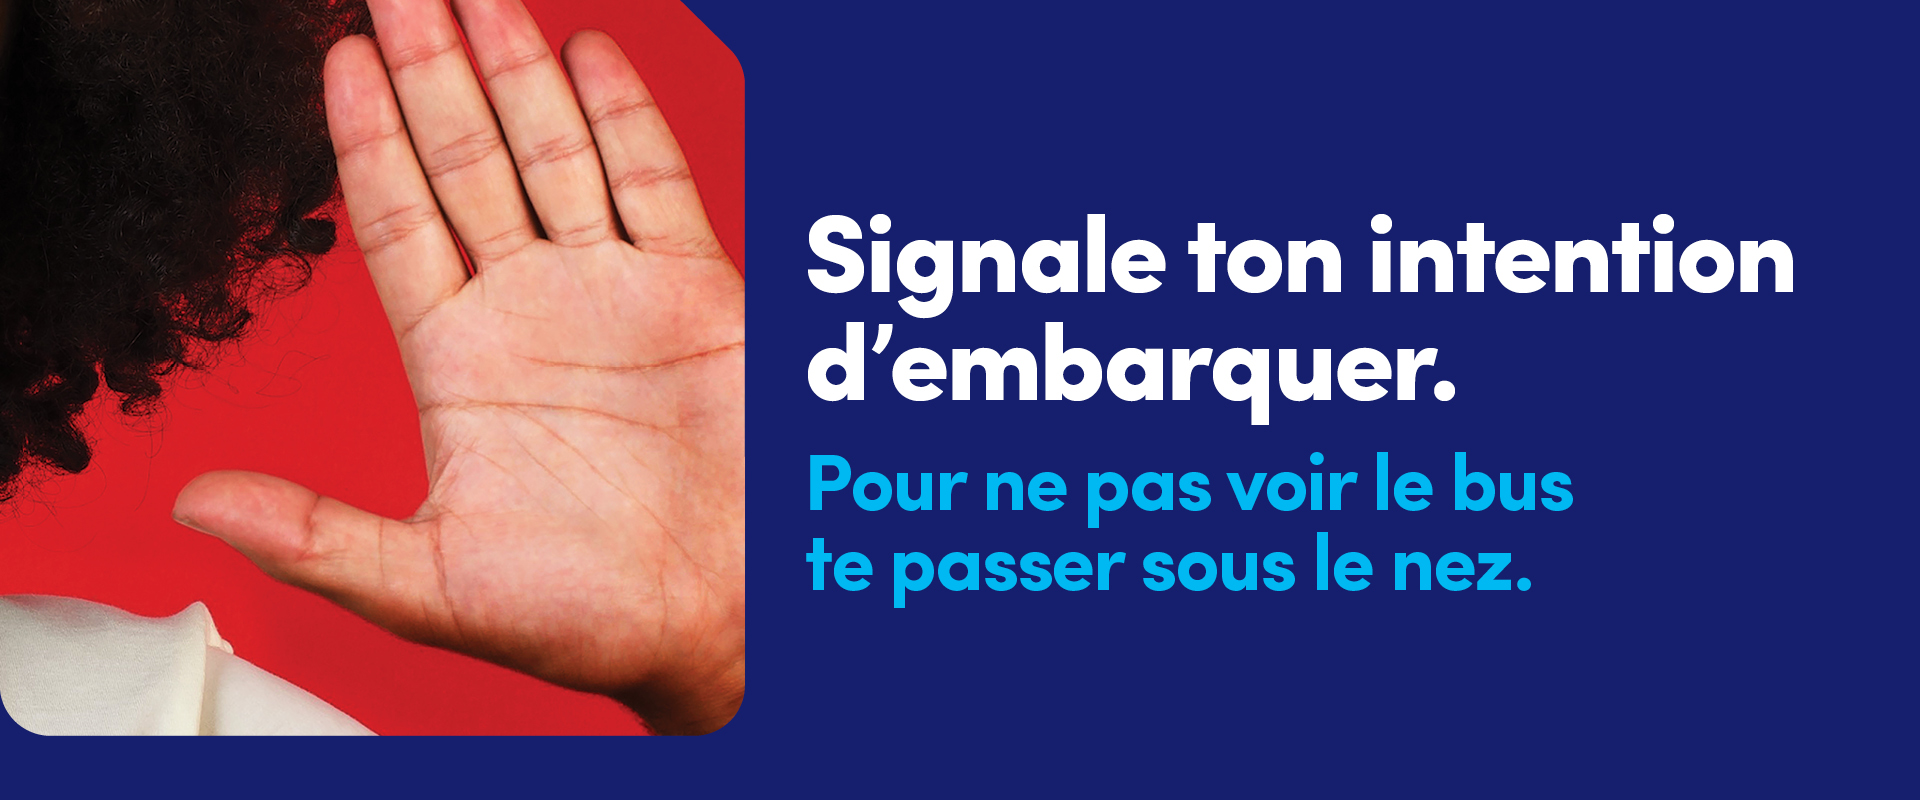 Signale ton intention d'embarquer